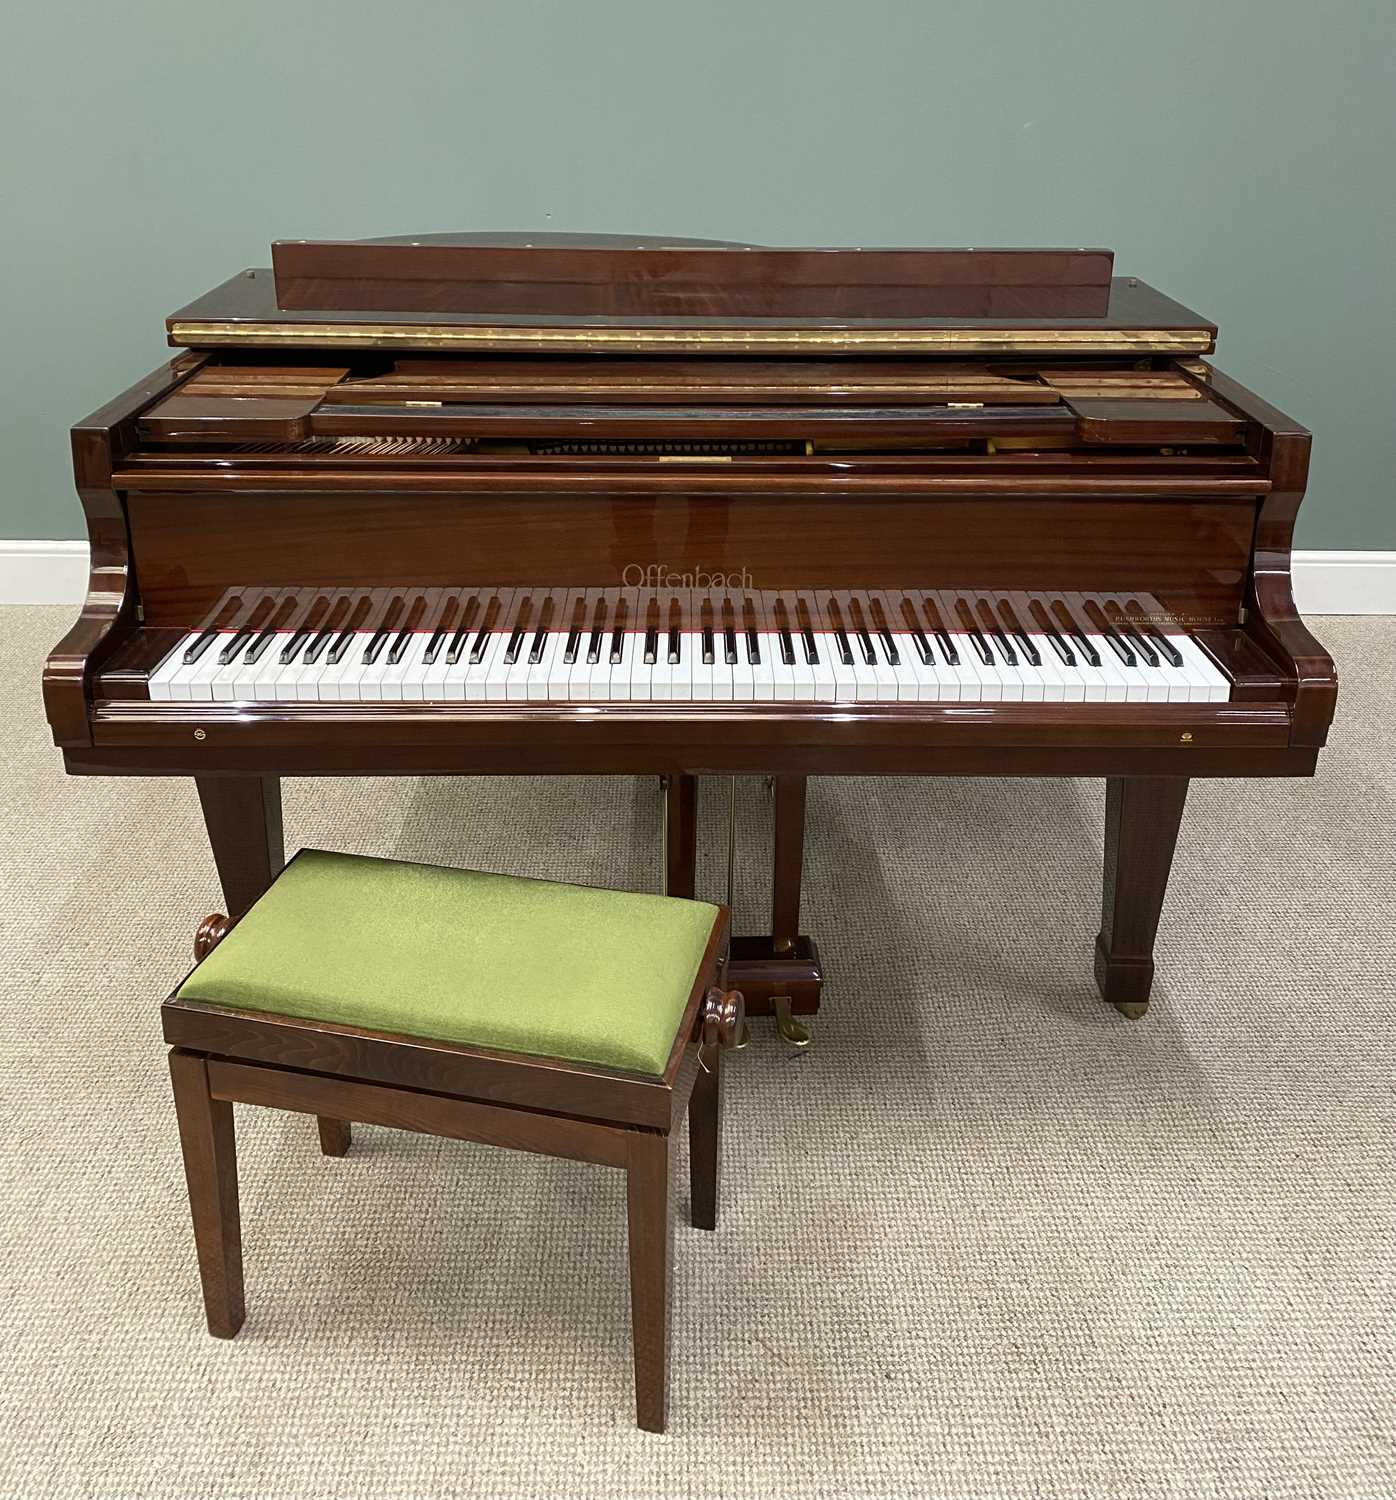 OFFENBACH MAHOGANY BABY GRAND PIANO WITH RISE & FALL PIANO STOOL, 101cms H, 148cms W, 155cms approx. - Image 4 of 11